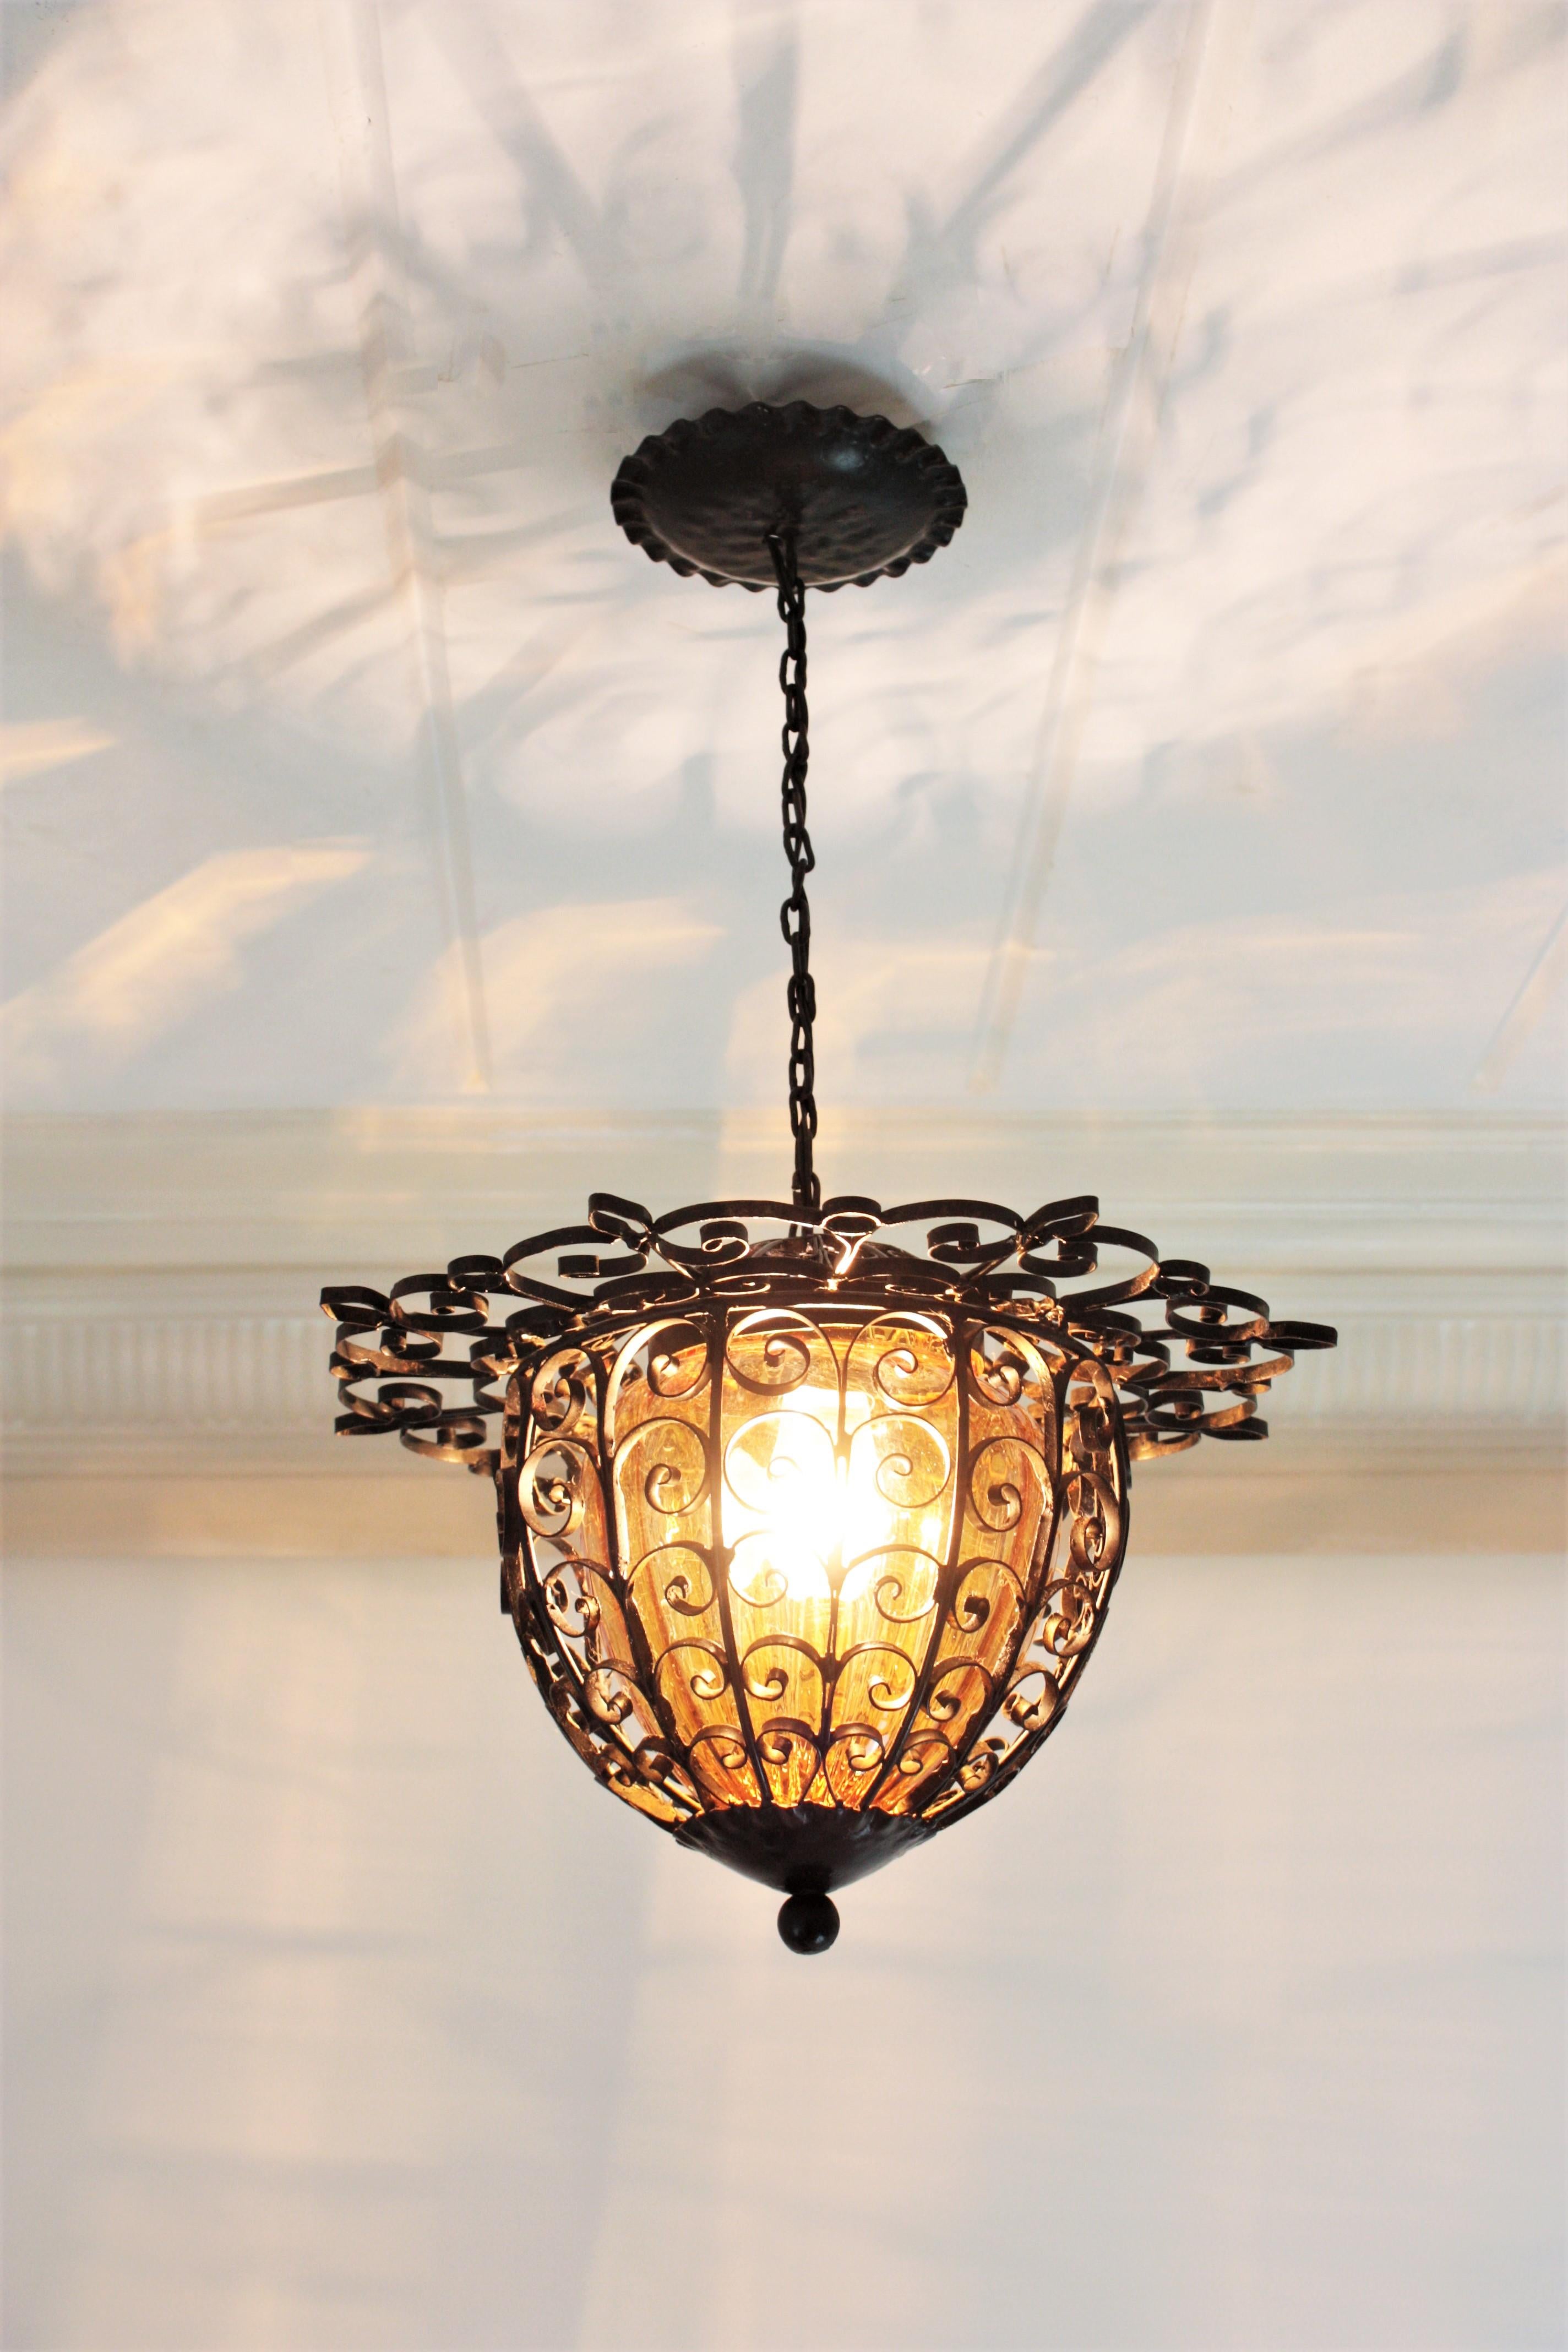 Eye-catching scrollwork iron lantern or hanging light with hand blown amber shade, Spain, 1940s.
The structure of this pendant light is made with wrought iron scroll decorations. It has an inner amber glass globe shade and the top of the lantern